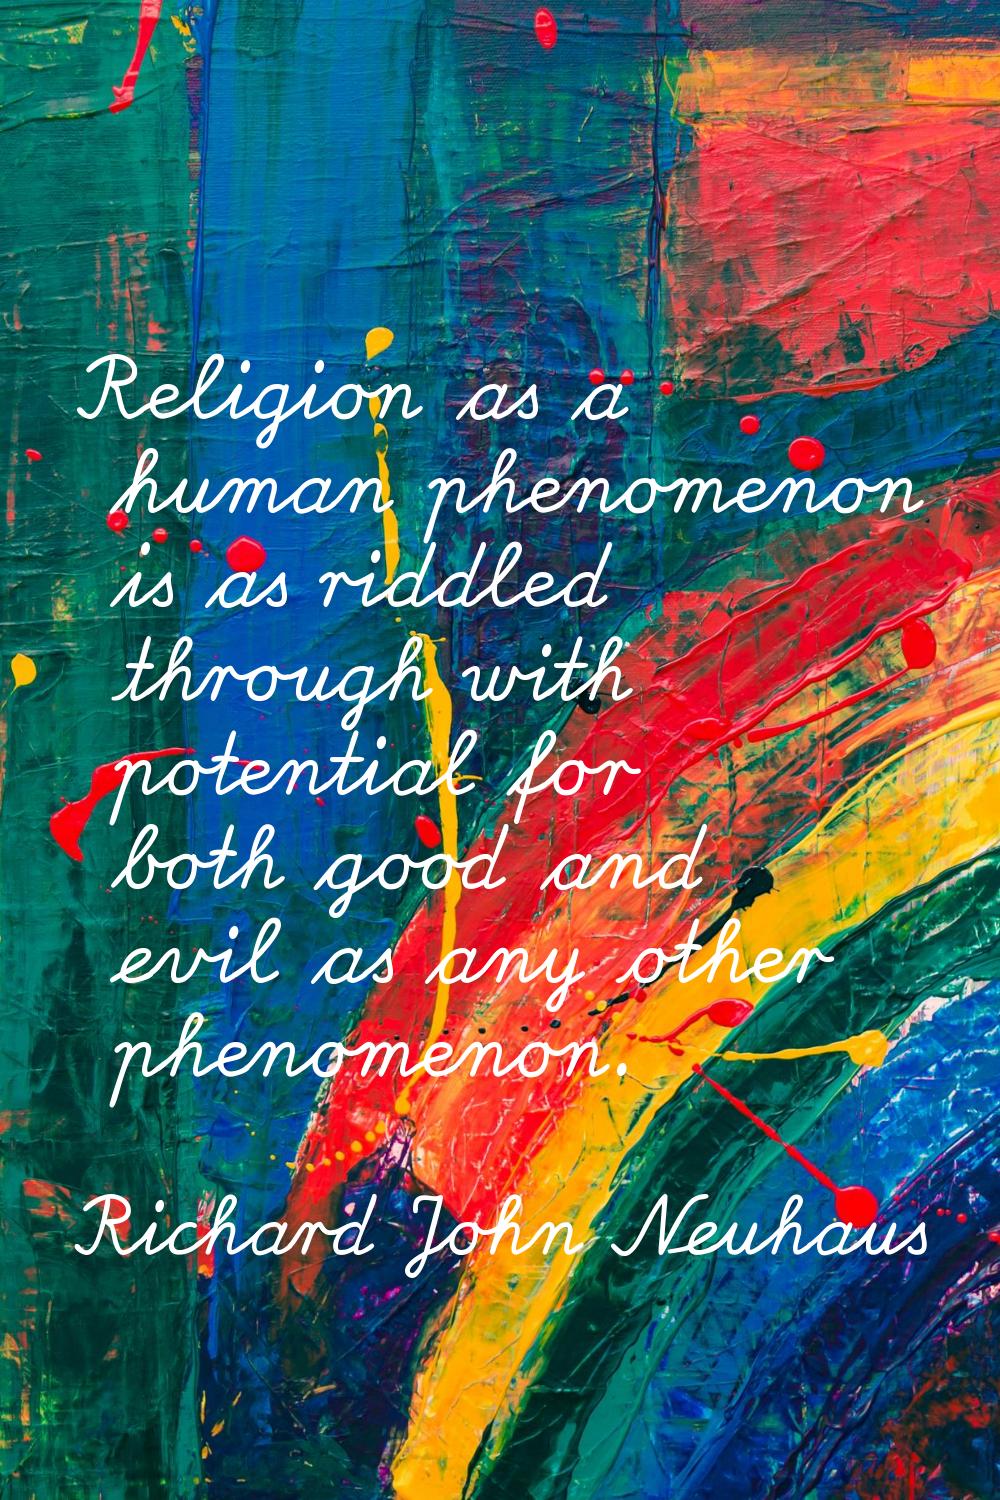 Religion as a human phenomenon is as riddled through with potential for both good and evil as any o